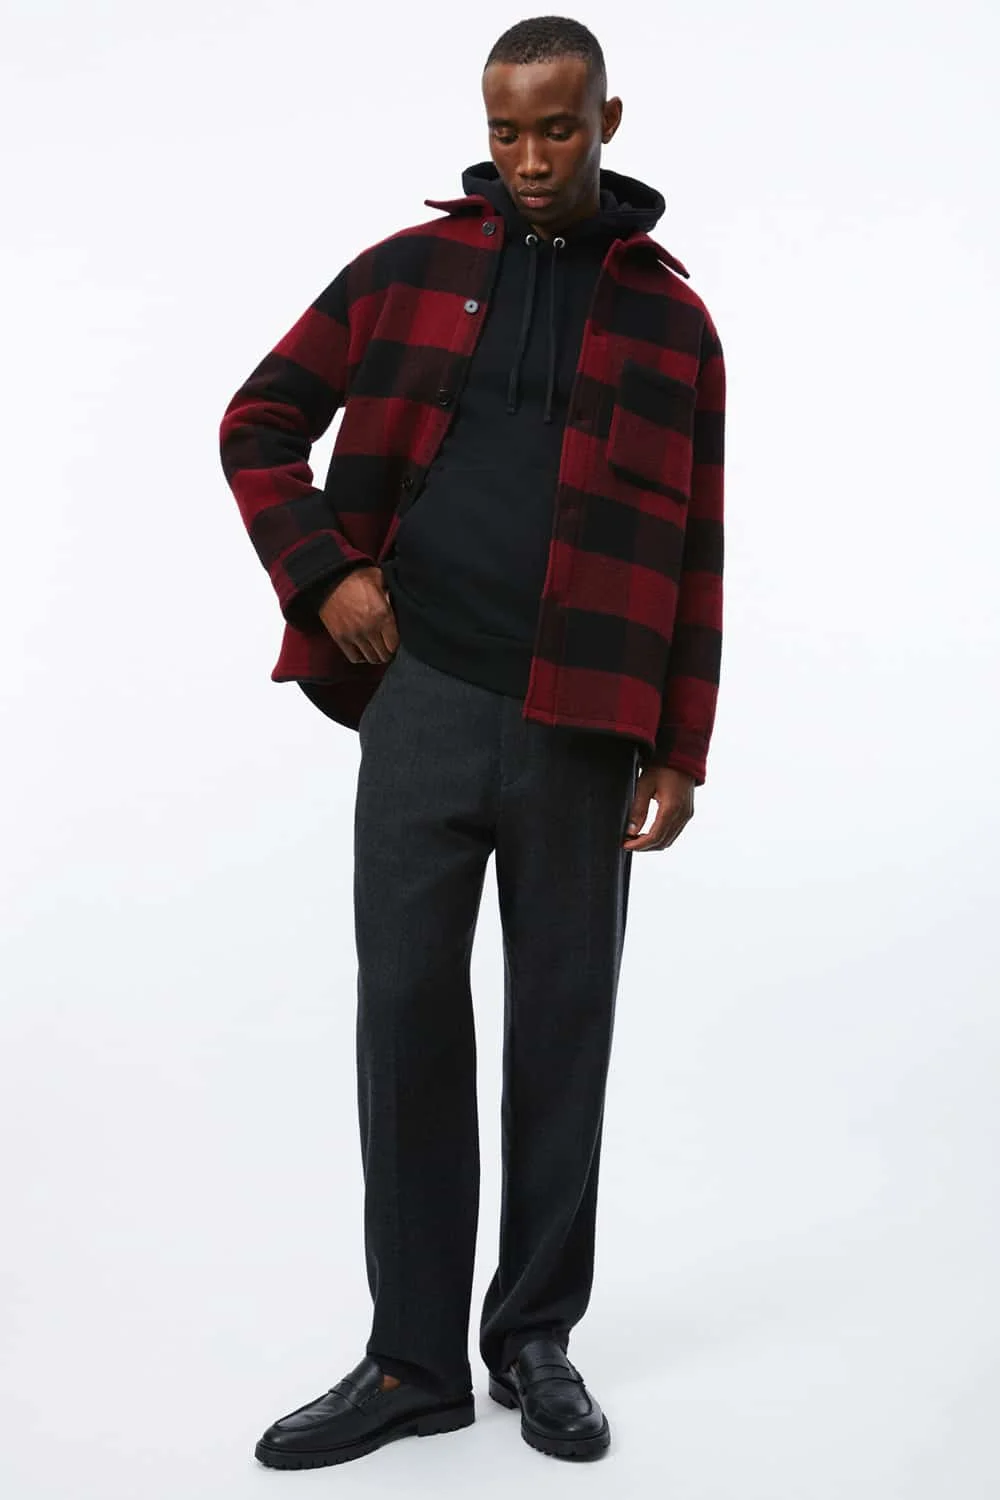 Red Flannel Over Hoodie: A Bold, Statement Ensemble